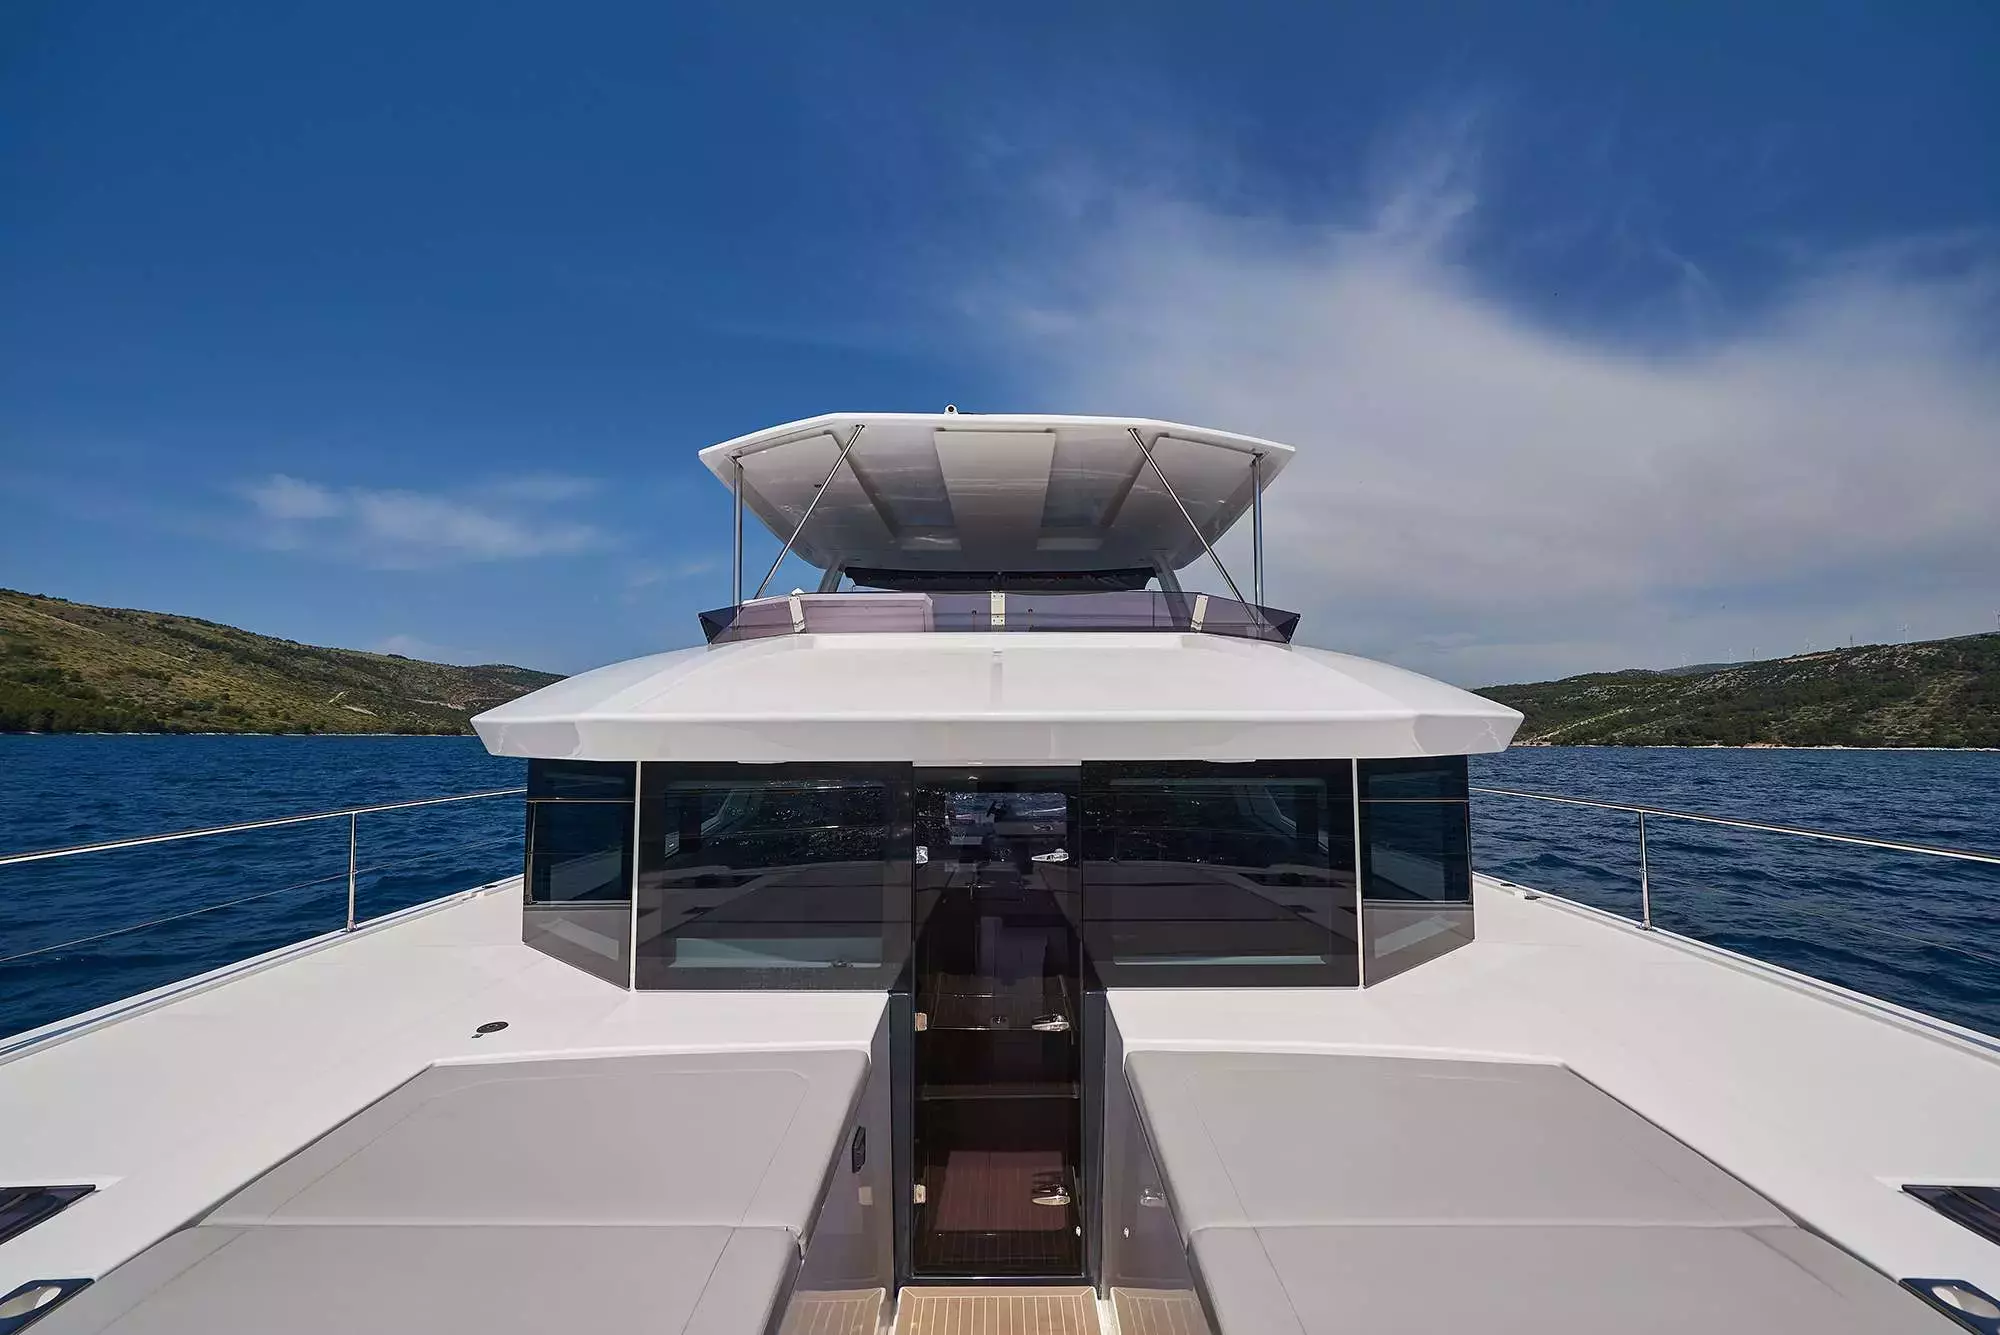 Good Vibes by Leopard Catamarans - Top rates for a Rental of a private Power Catamaran in Croatia